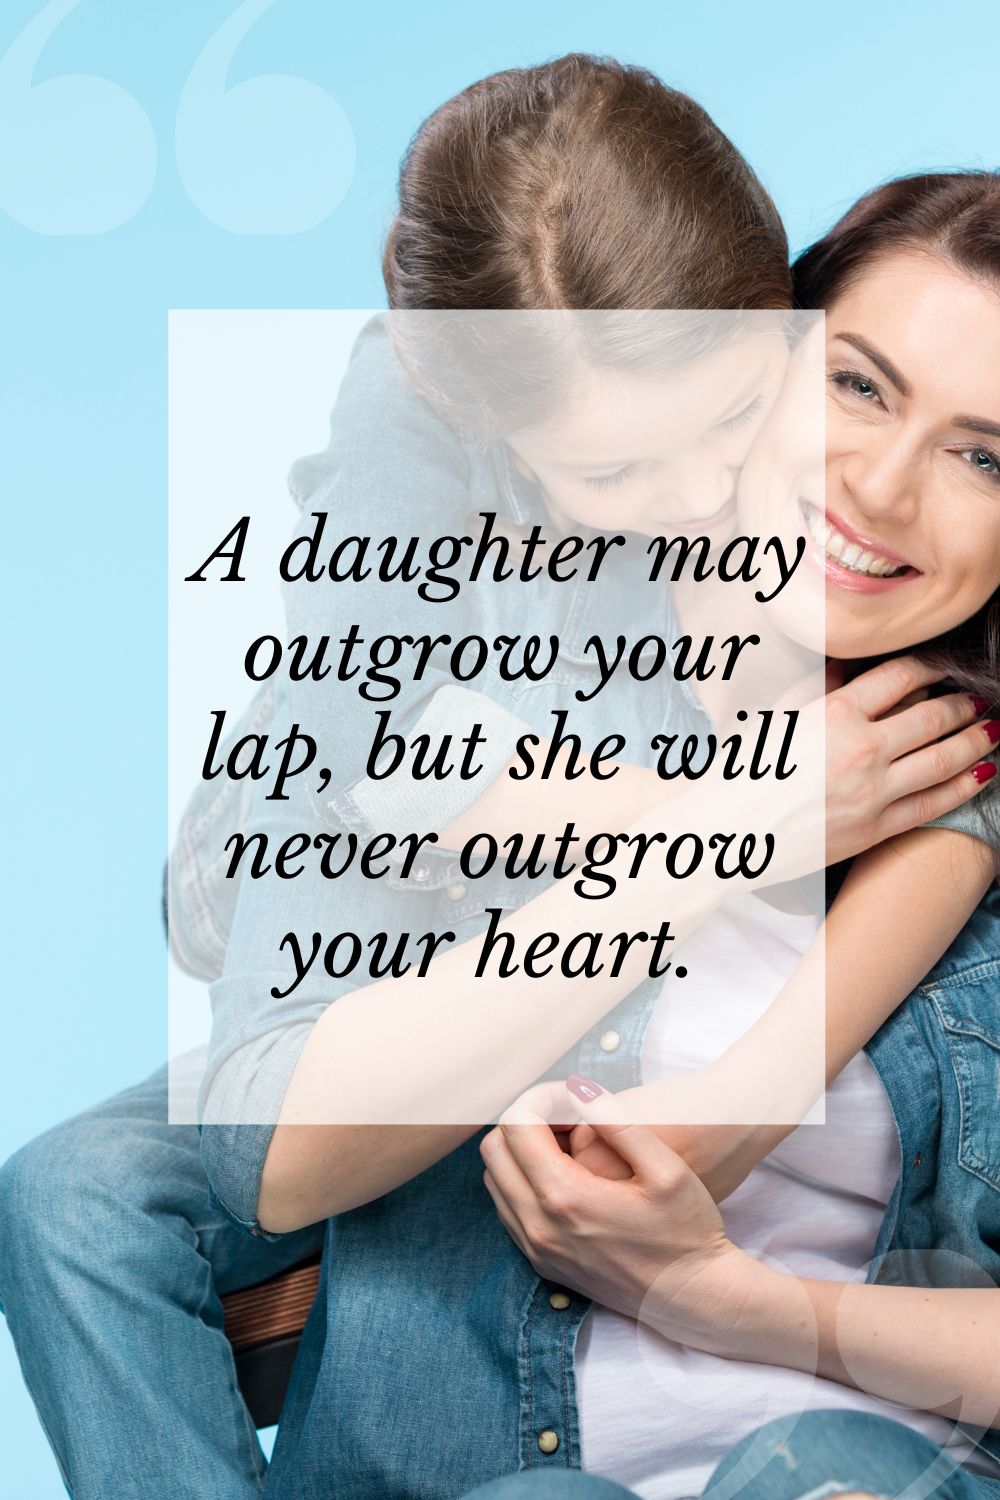 100+ stunning mother daughter quotes to make you laugh and cry - The Mummy  Bubble